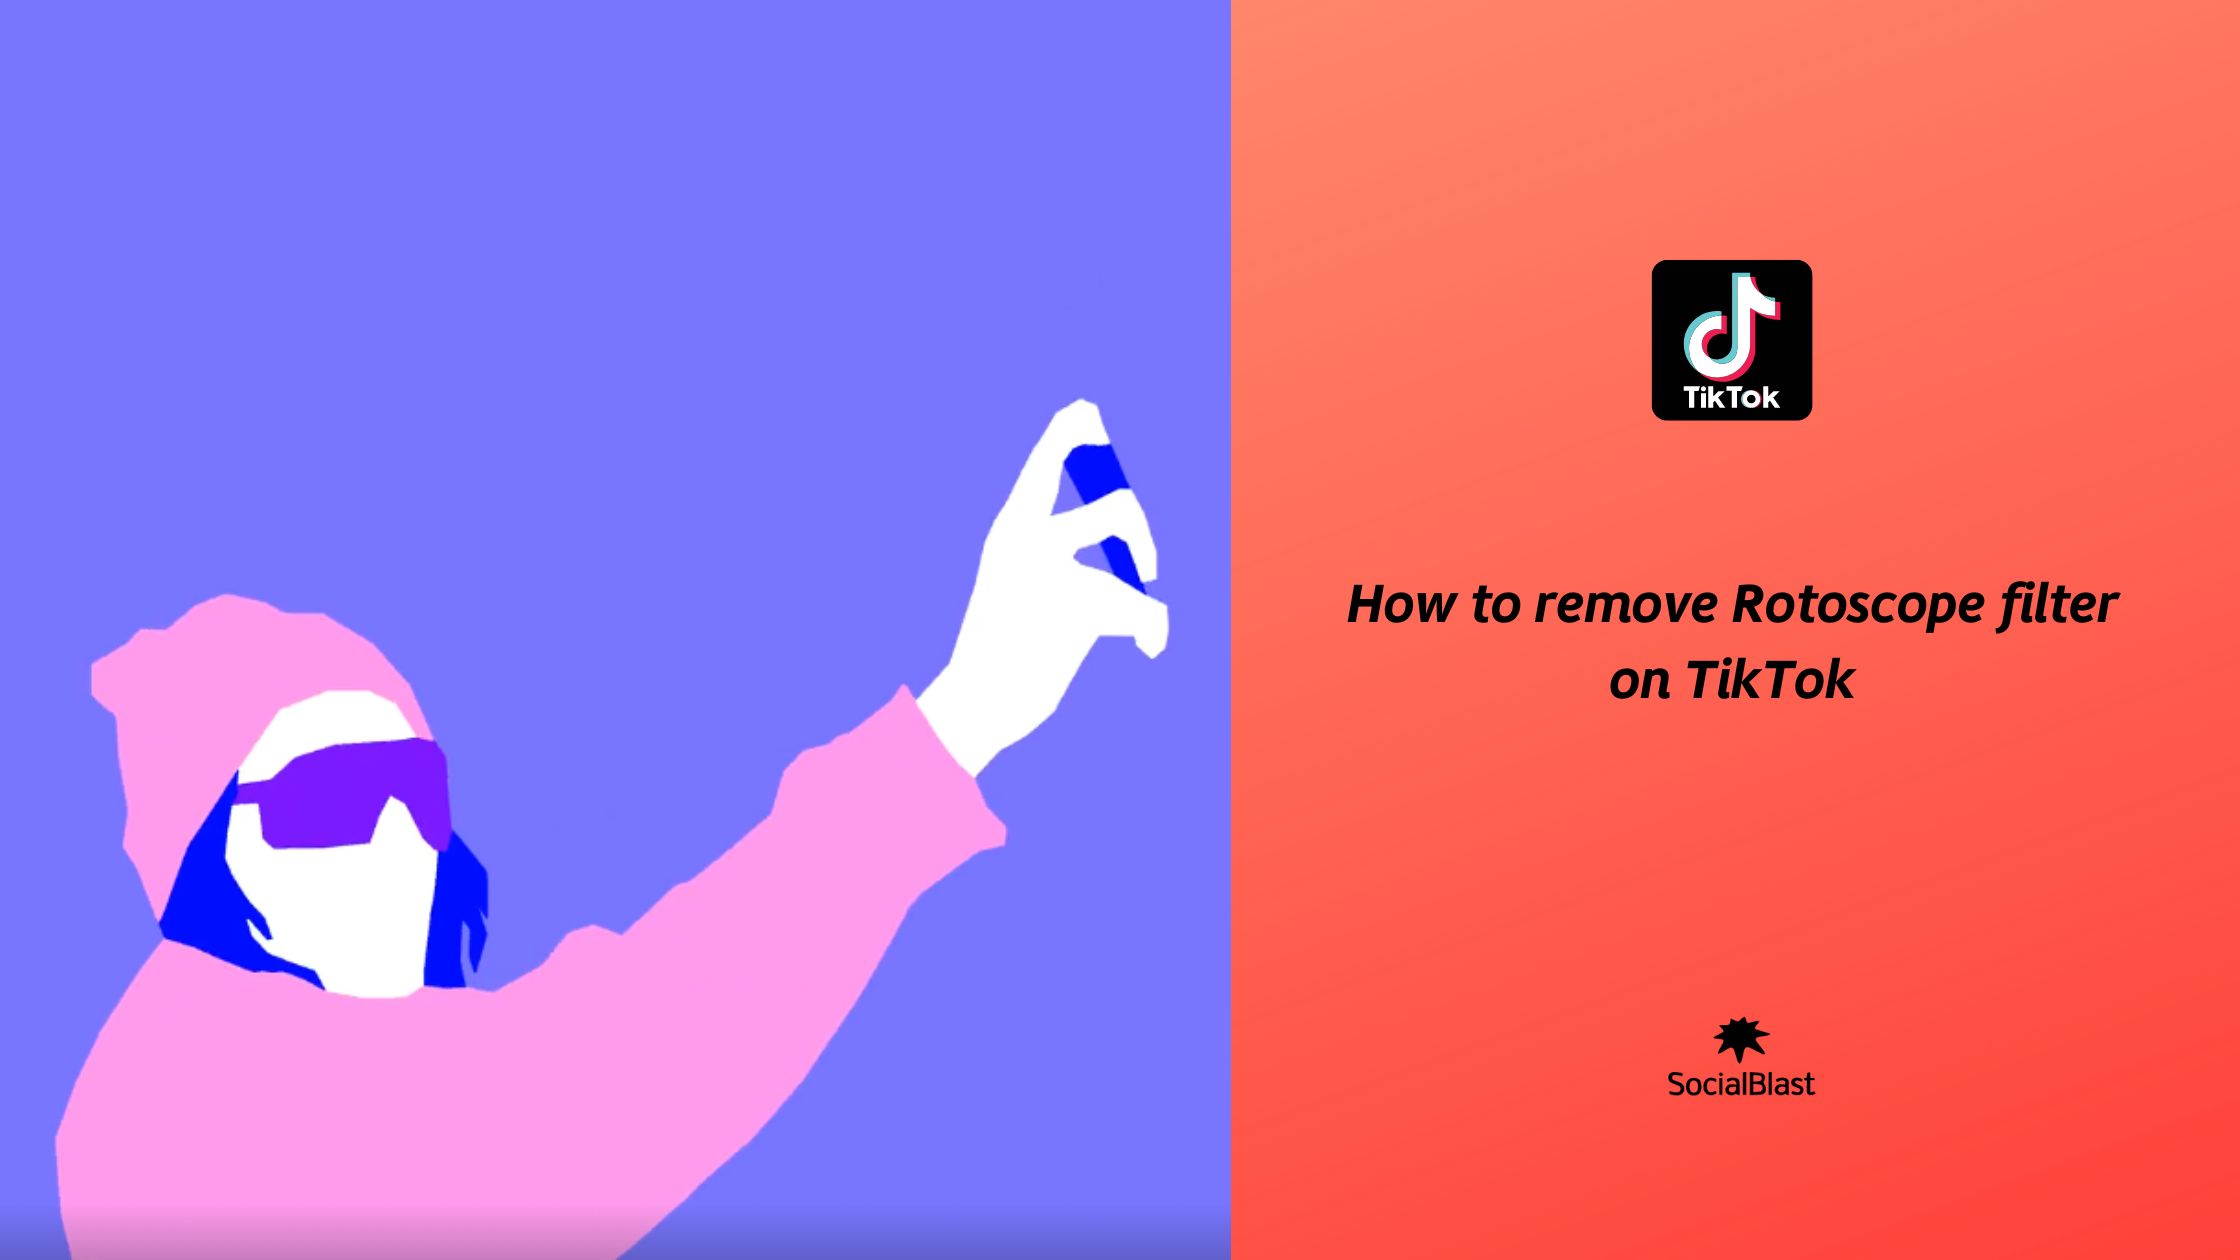 How to remove the rotoscope filter on TikTok